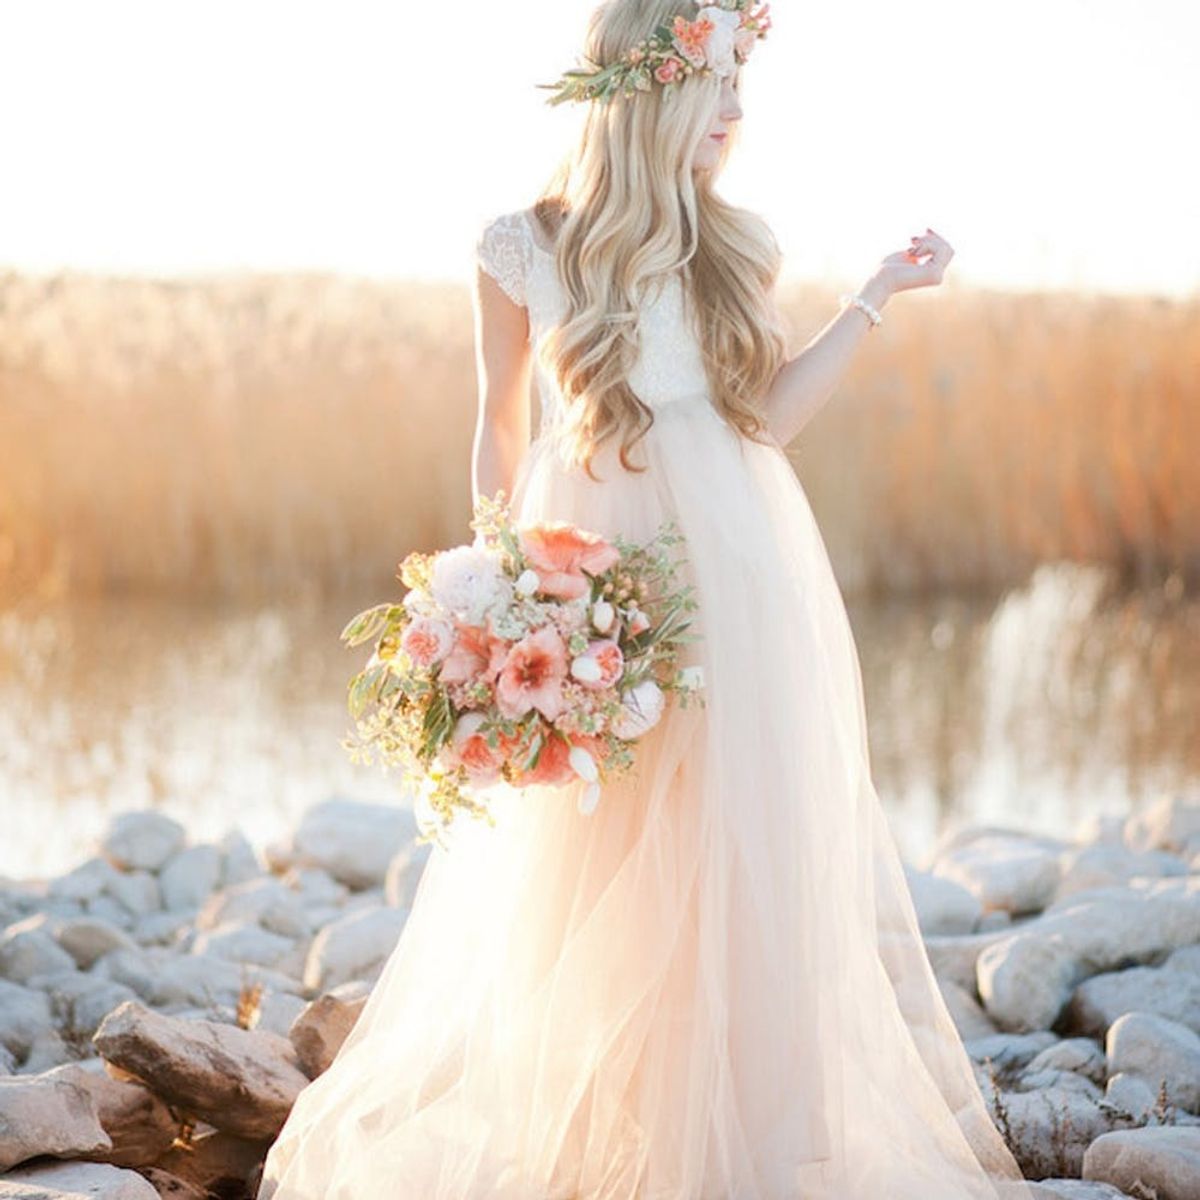 10 Bridal Trends That Are Going to Be BIG in 2015